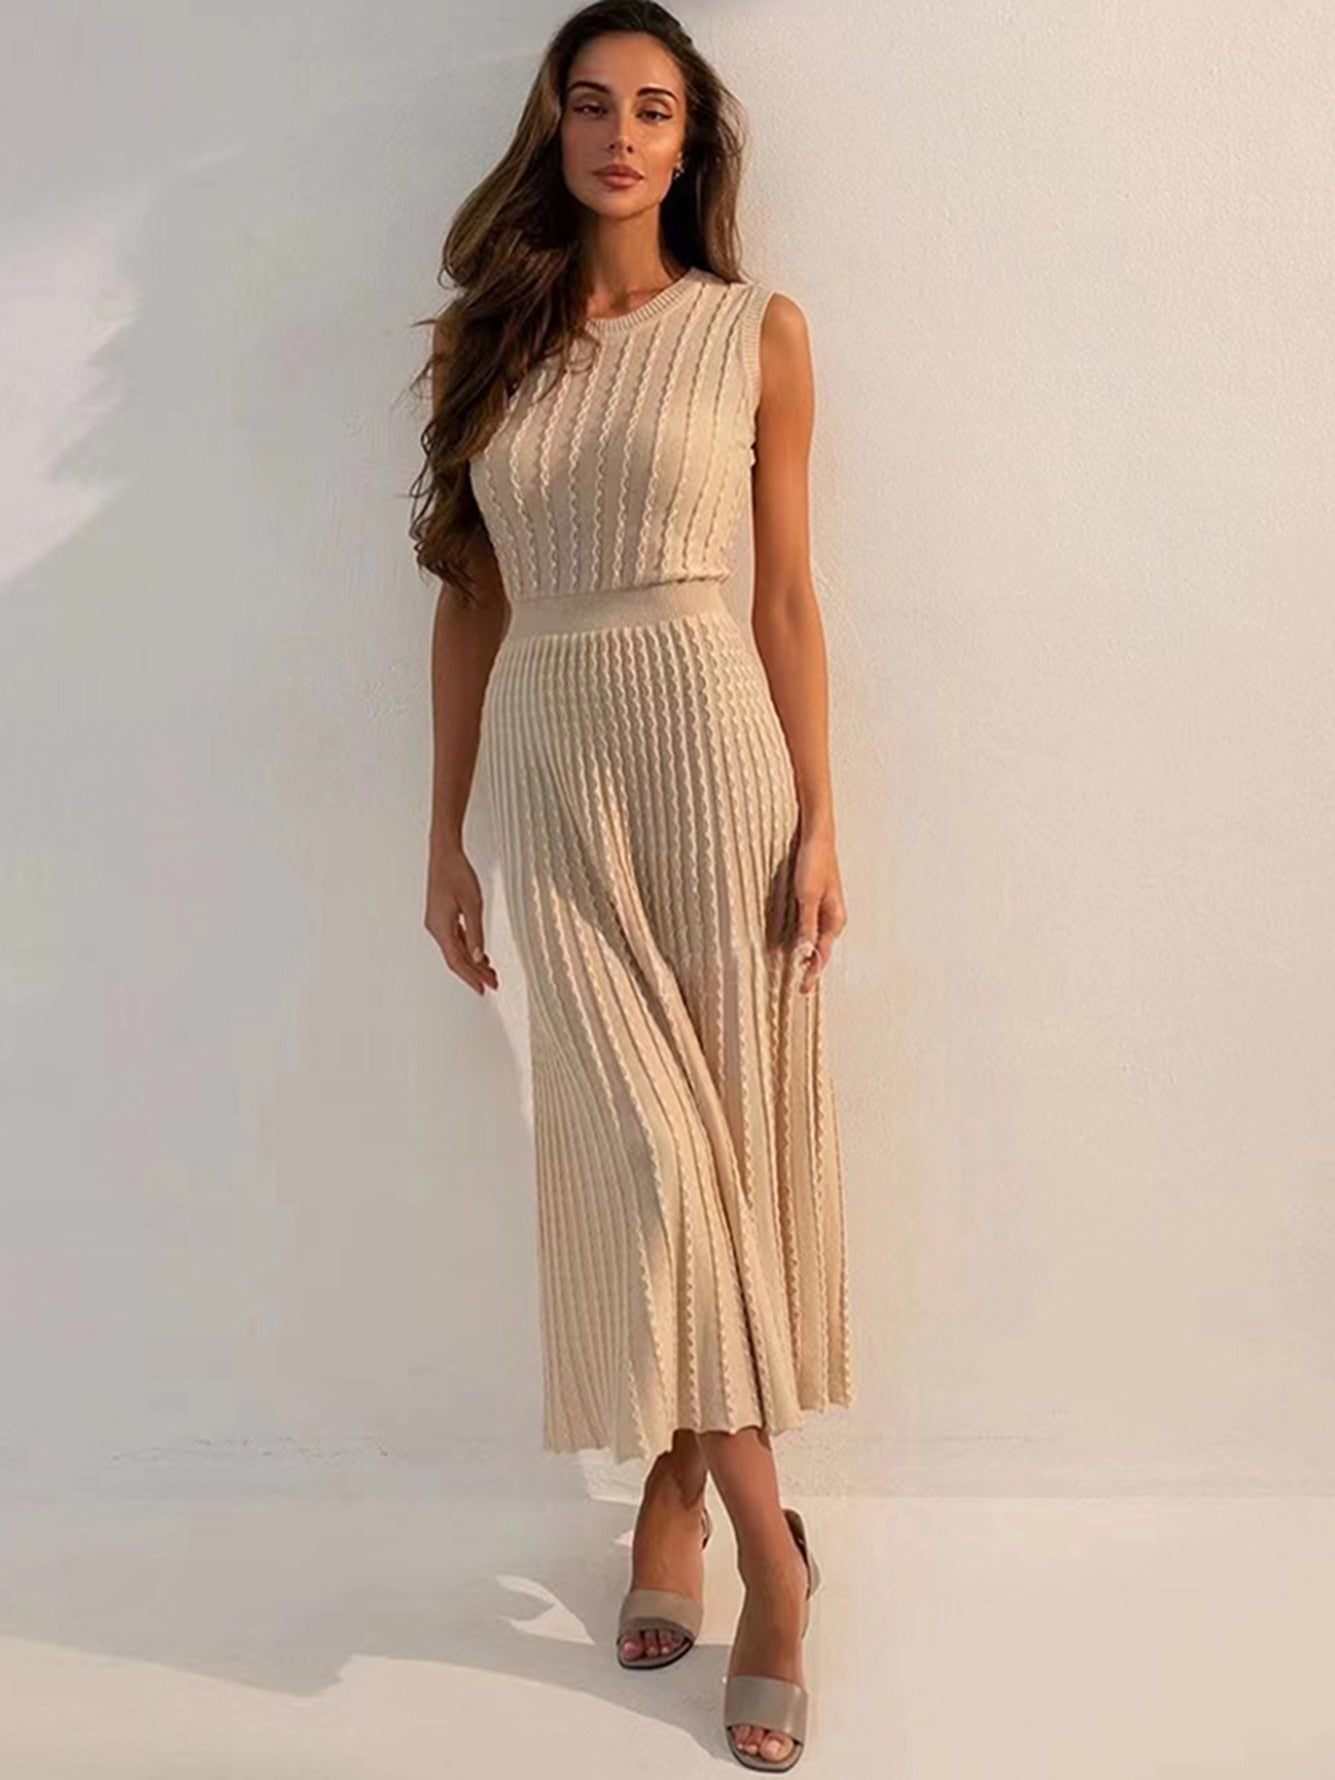 Clacive Vintage Knitted Dress For Women O Collar Draped Sleeveless High Waist Knit Midi A Line Dresses Female  Spring Fashion New